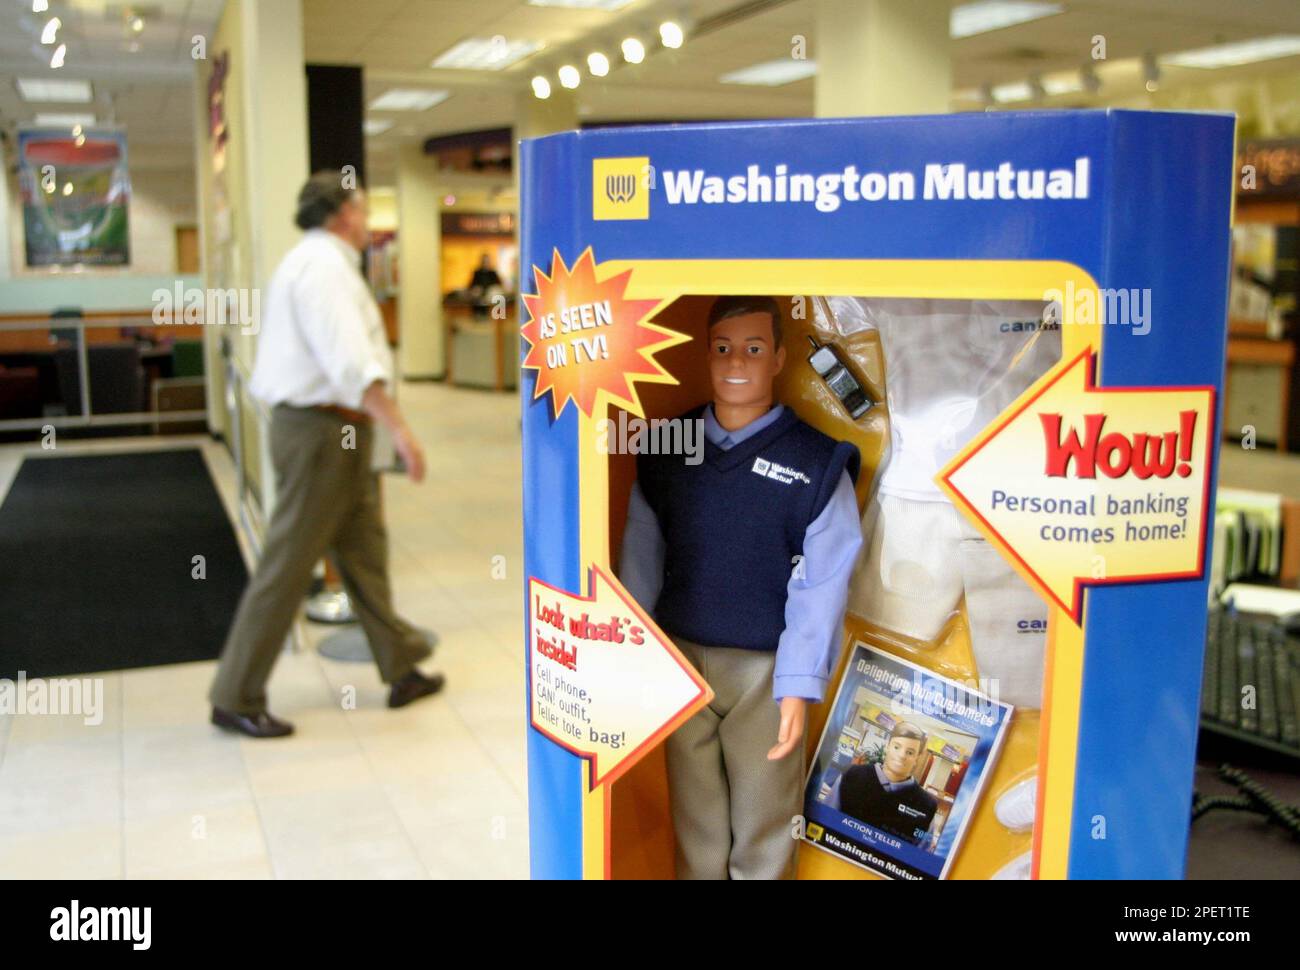 A Washington Mutual bank teller doll is seen on the concierge desk at the  downtown Seattle Washington Mutual branch, Wednesday Aug. 4, 2004.  Washington Mutual began using the dolls in an advertising